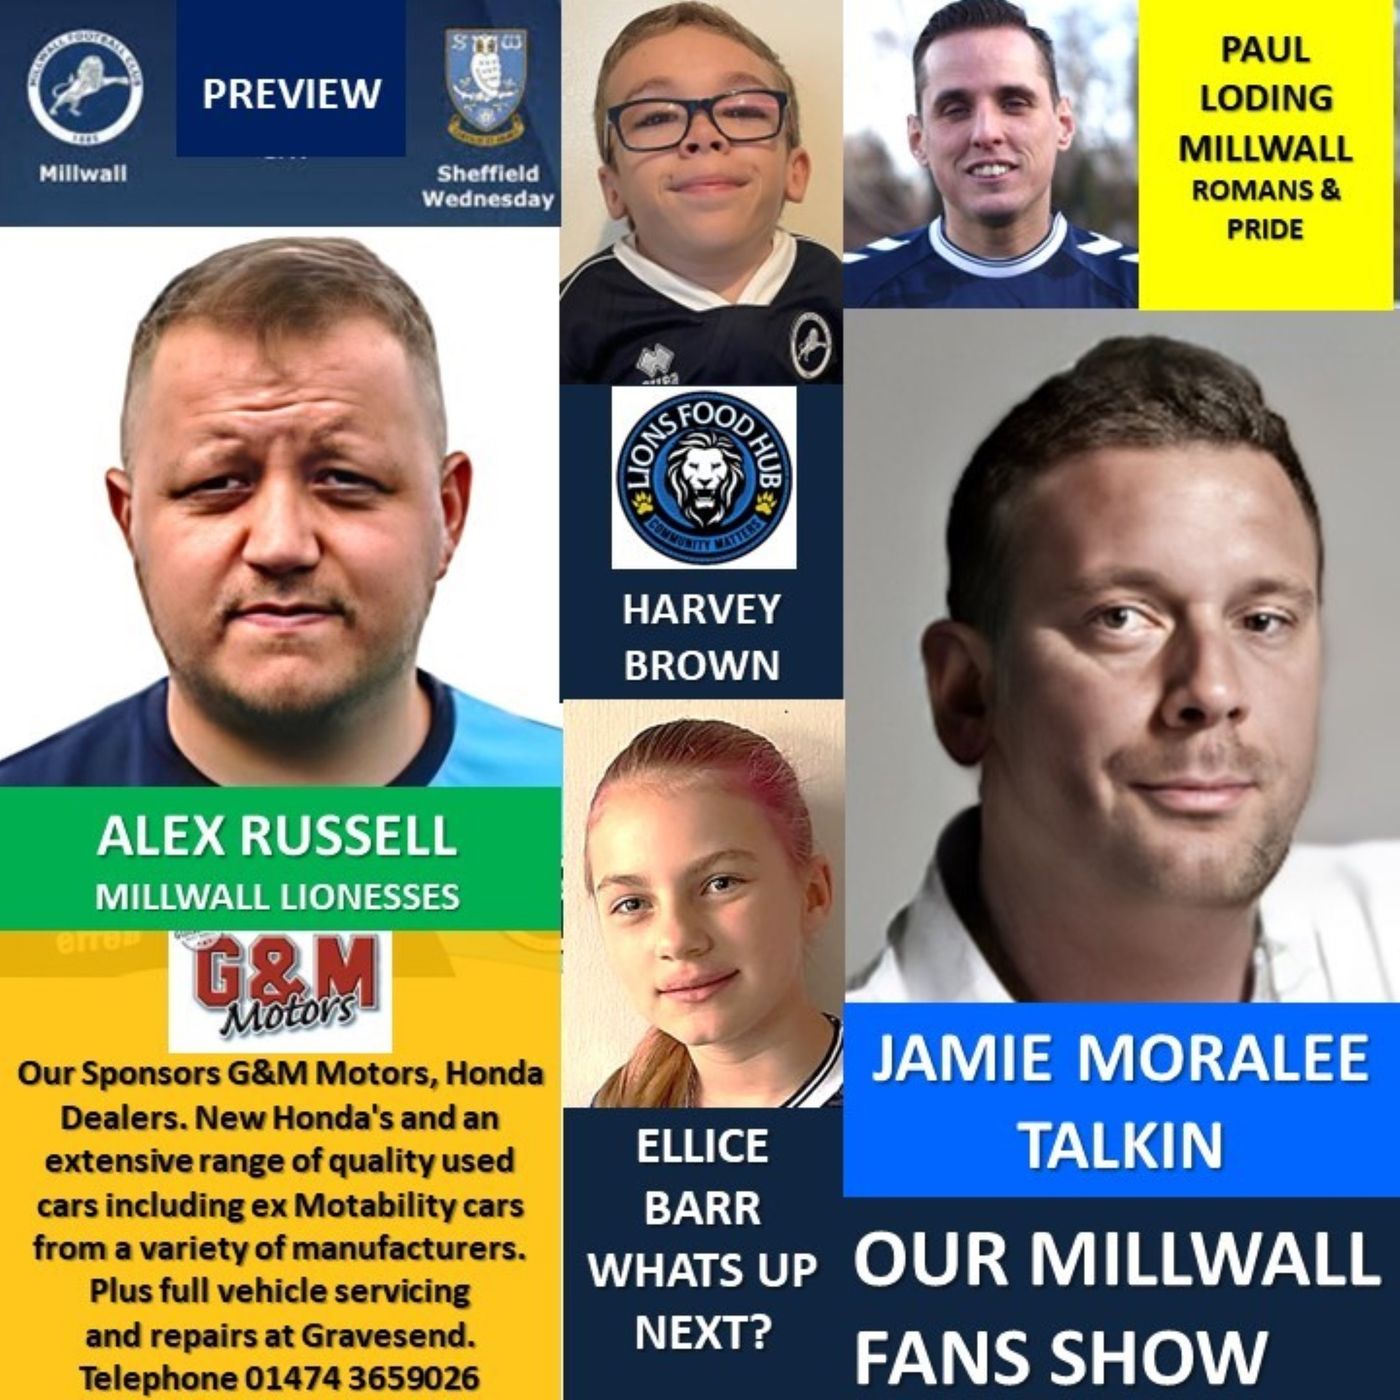 Our Millwall Fans Show - Sponsored by G&M Motors, Gravesend - 16/02/24